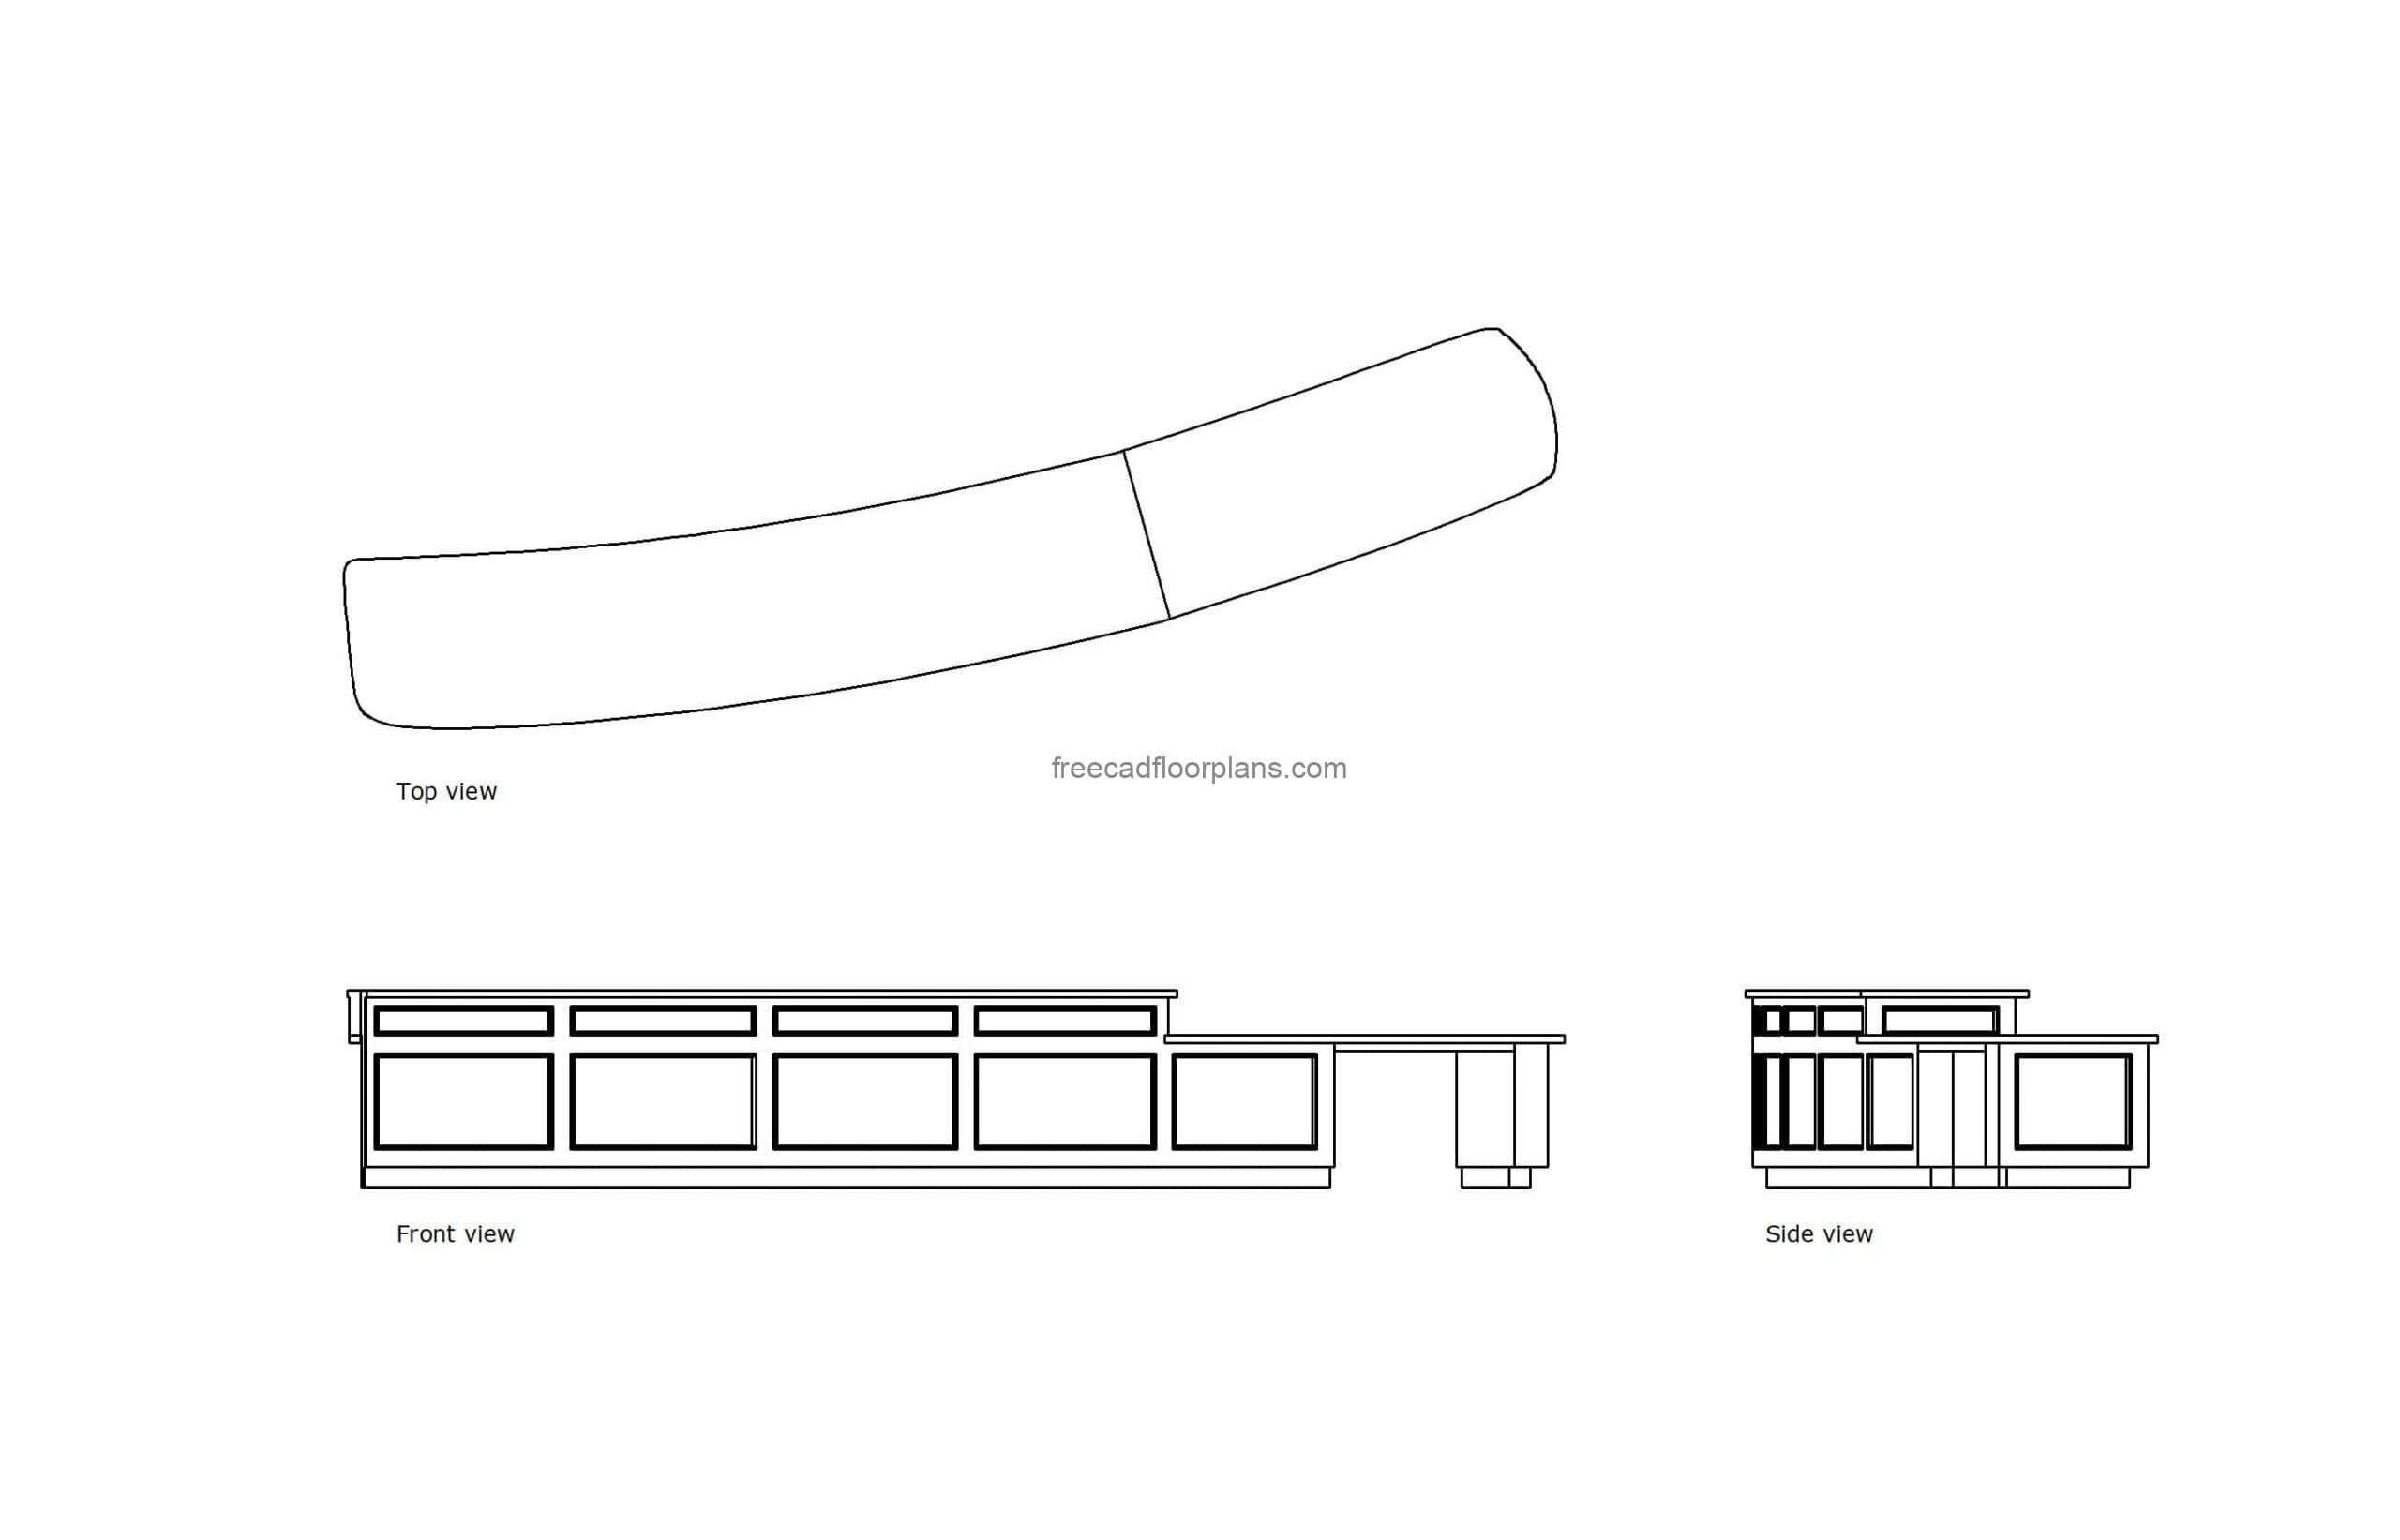 autocad drawing of a circulation desk, plan and elevation 2d views, dwg file free for download